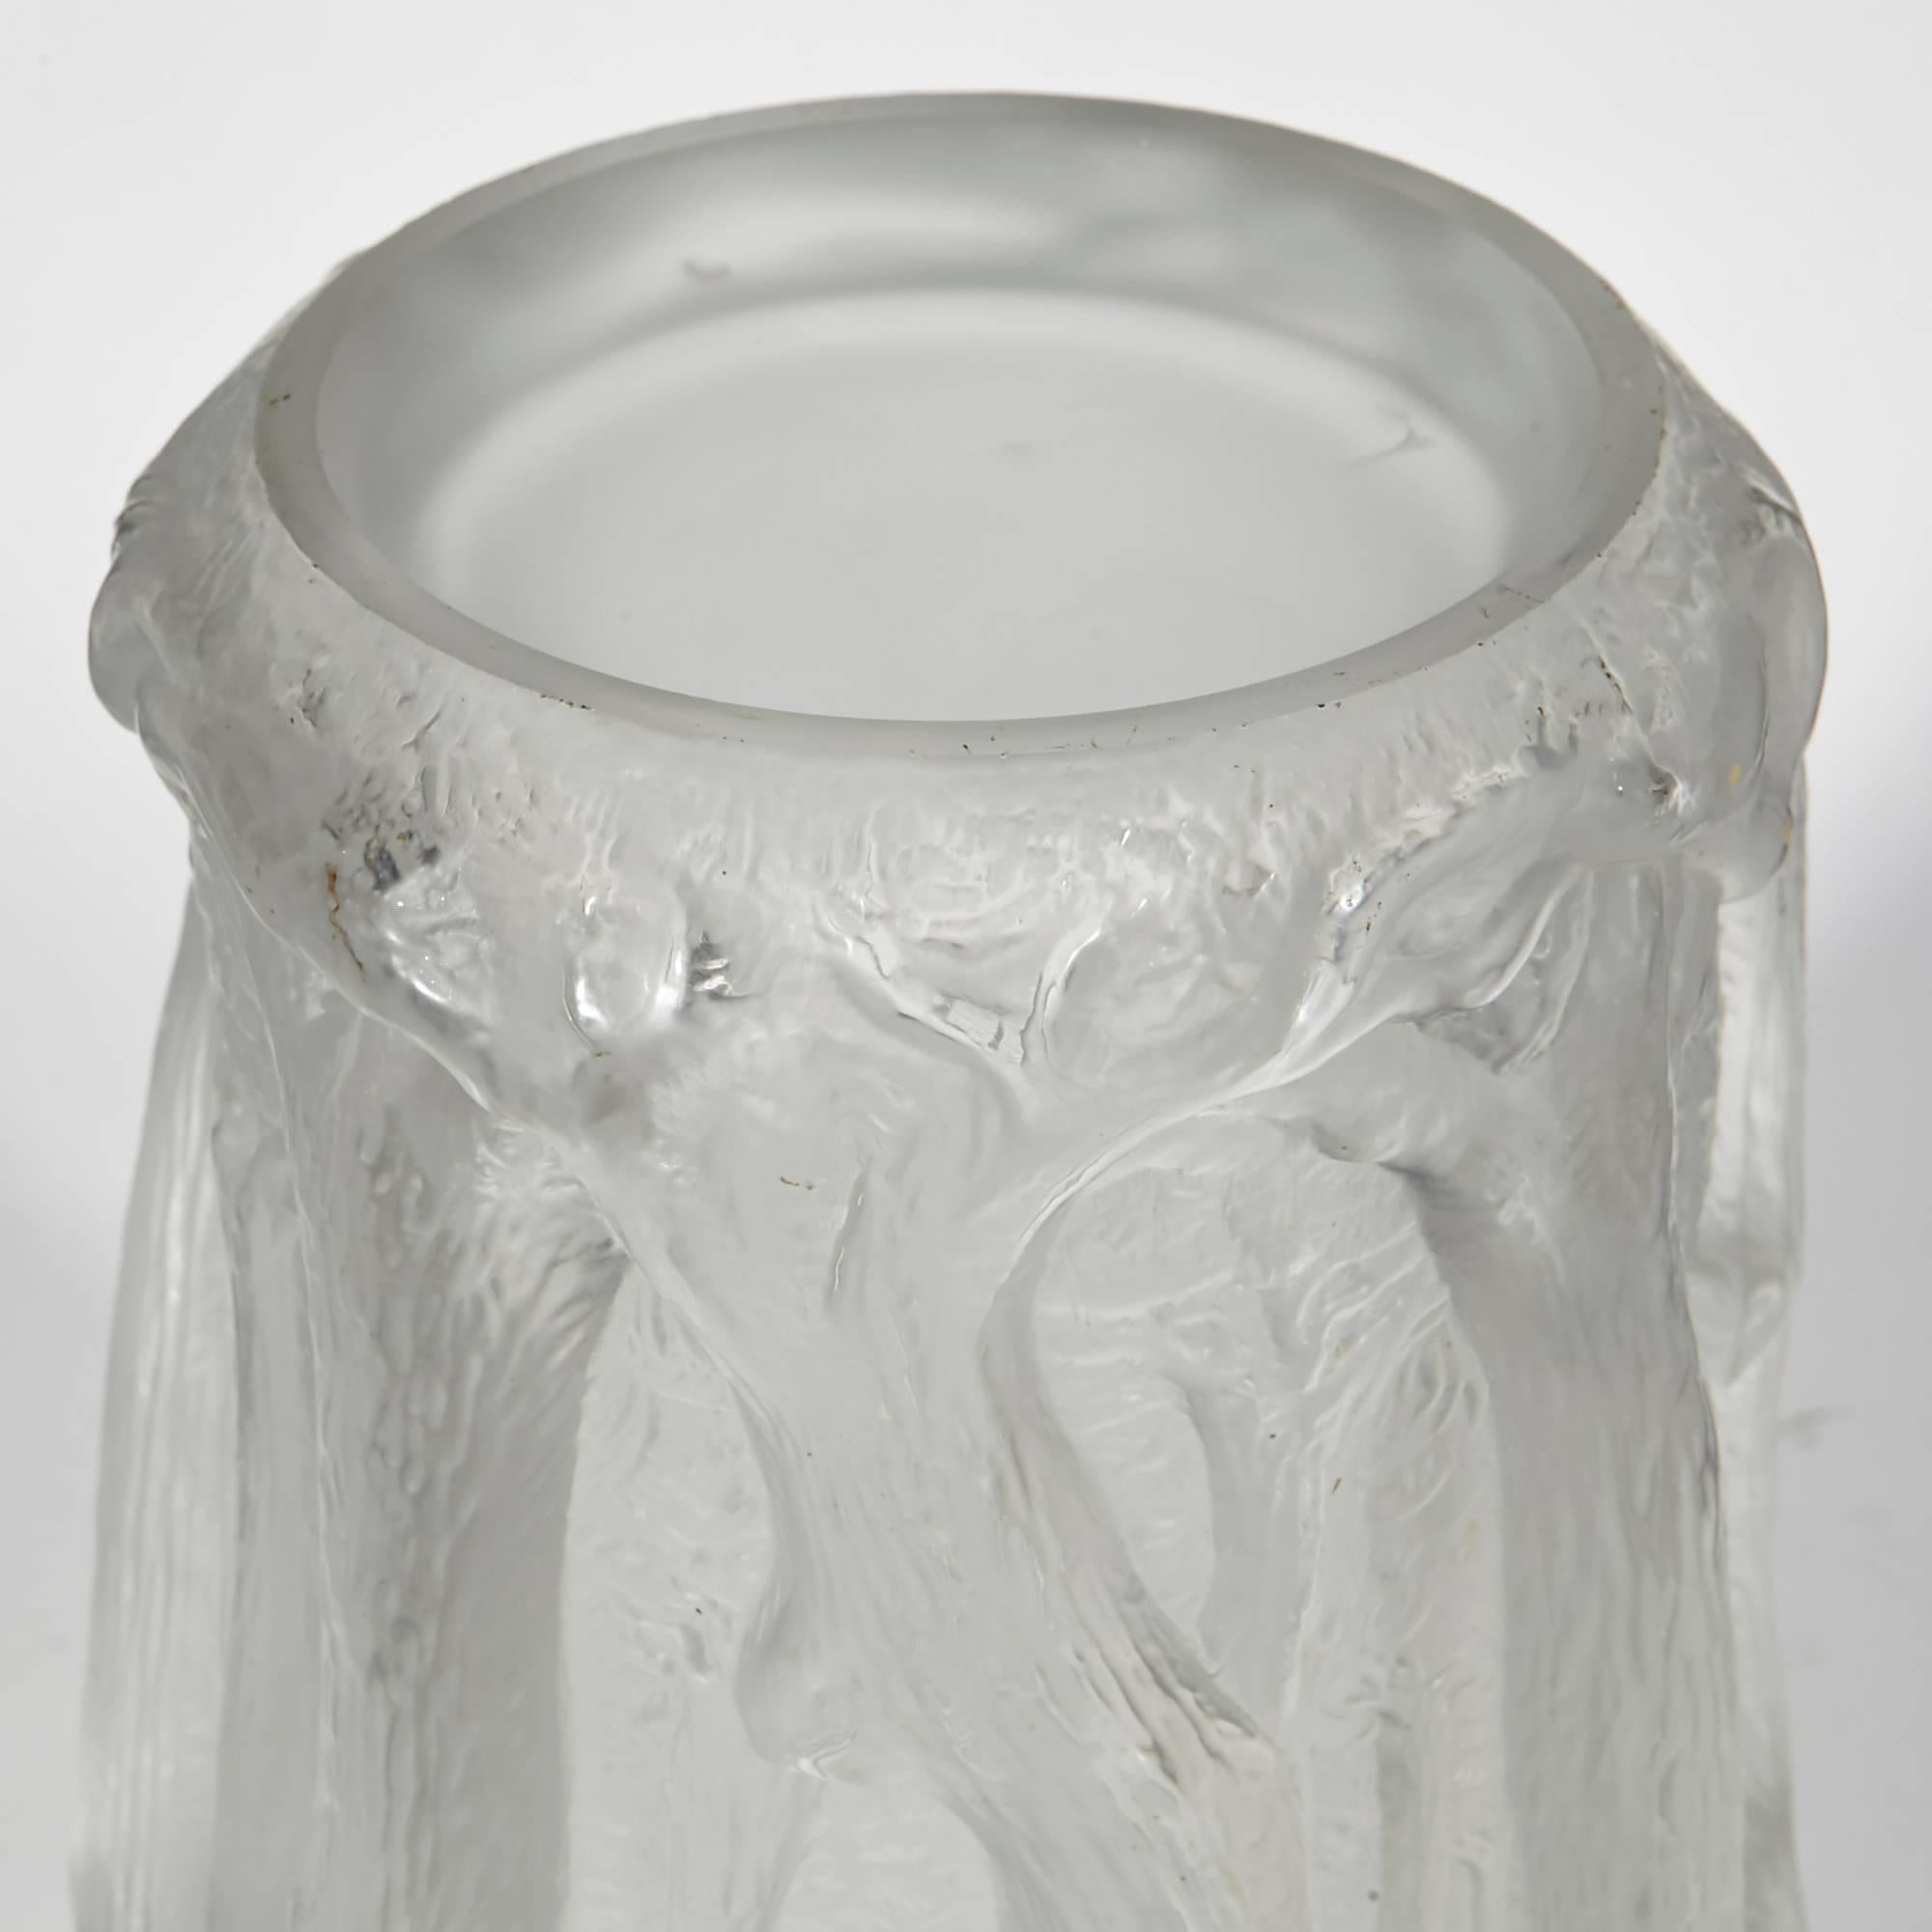 Czechoslovakian Josef Inwald Barolac Art Deco Frosted Glass Forest Vase In Excellent Condition For Sale In Amherst, NH